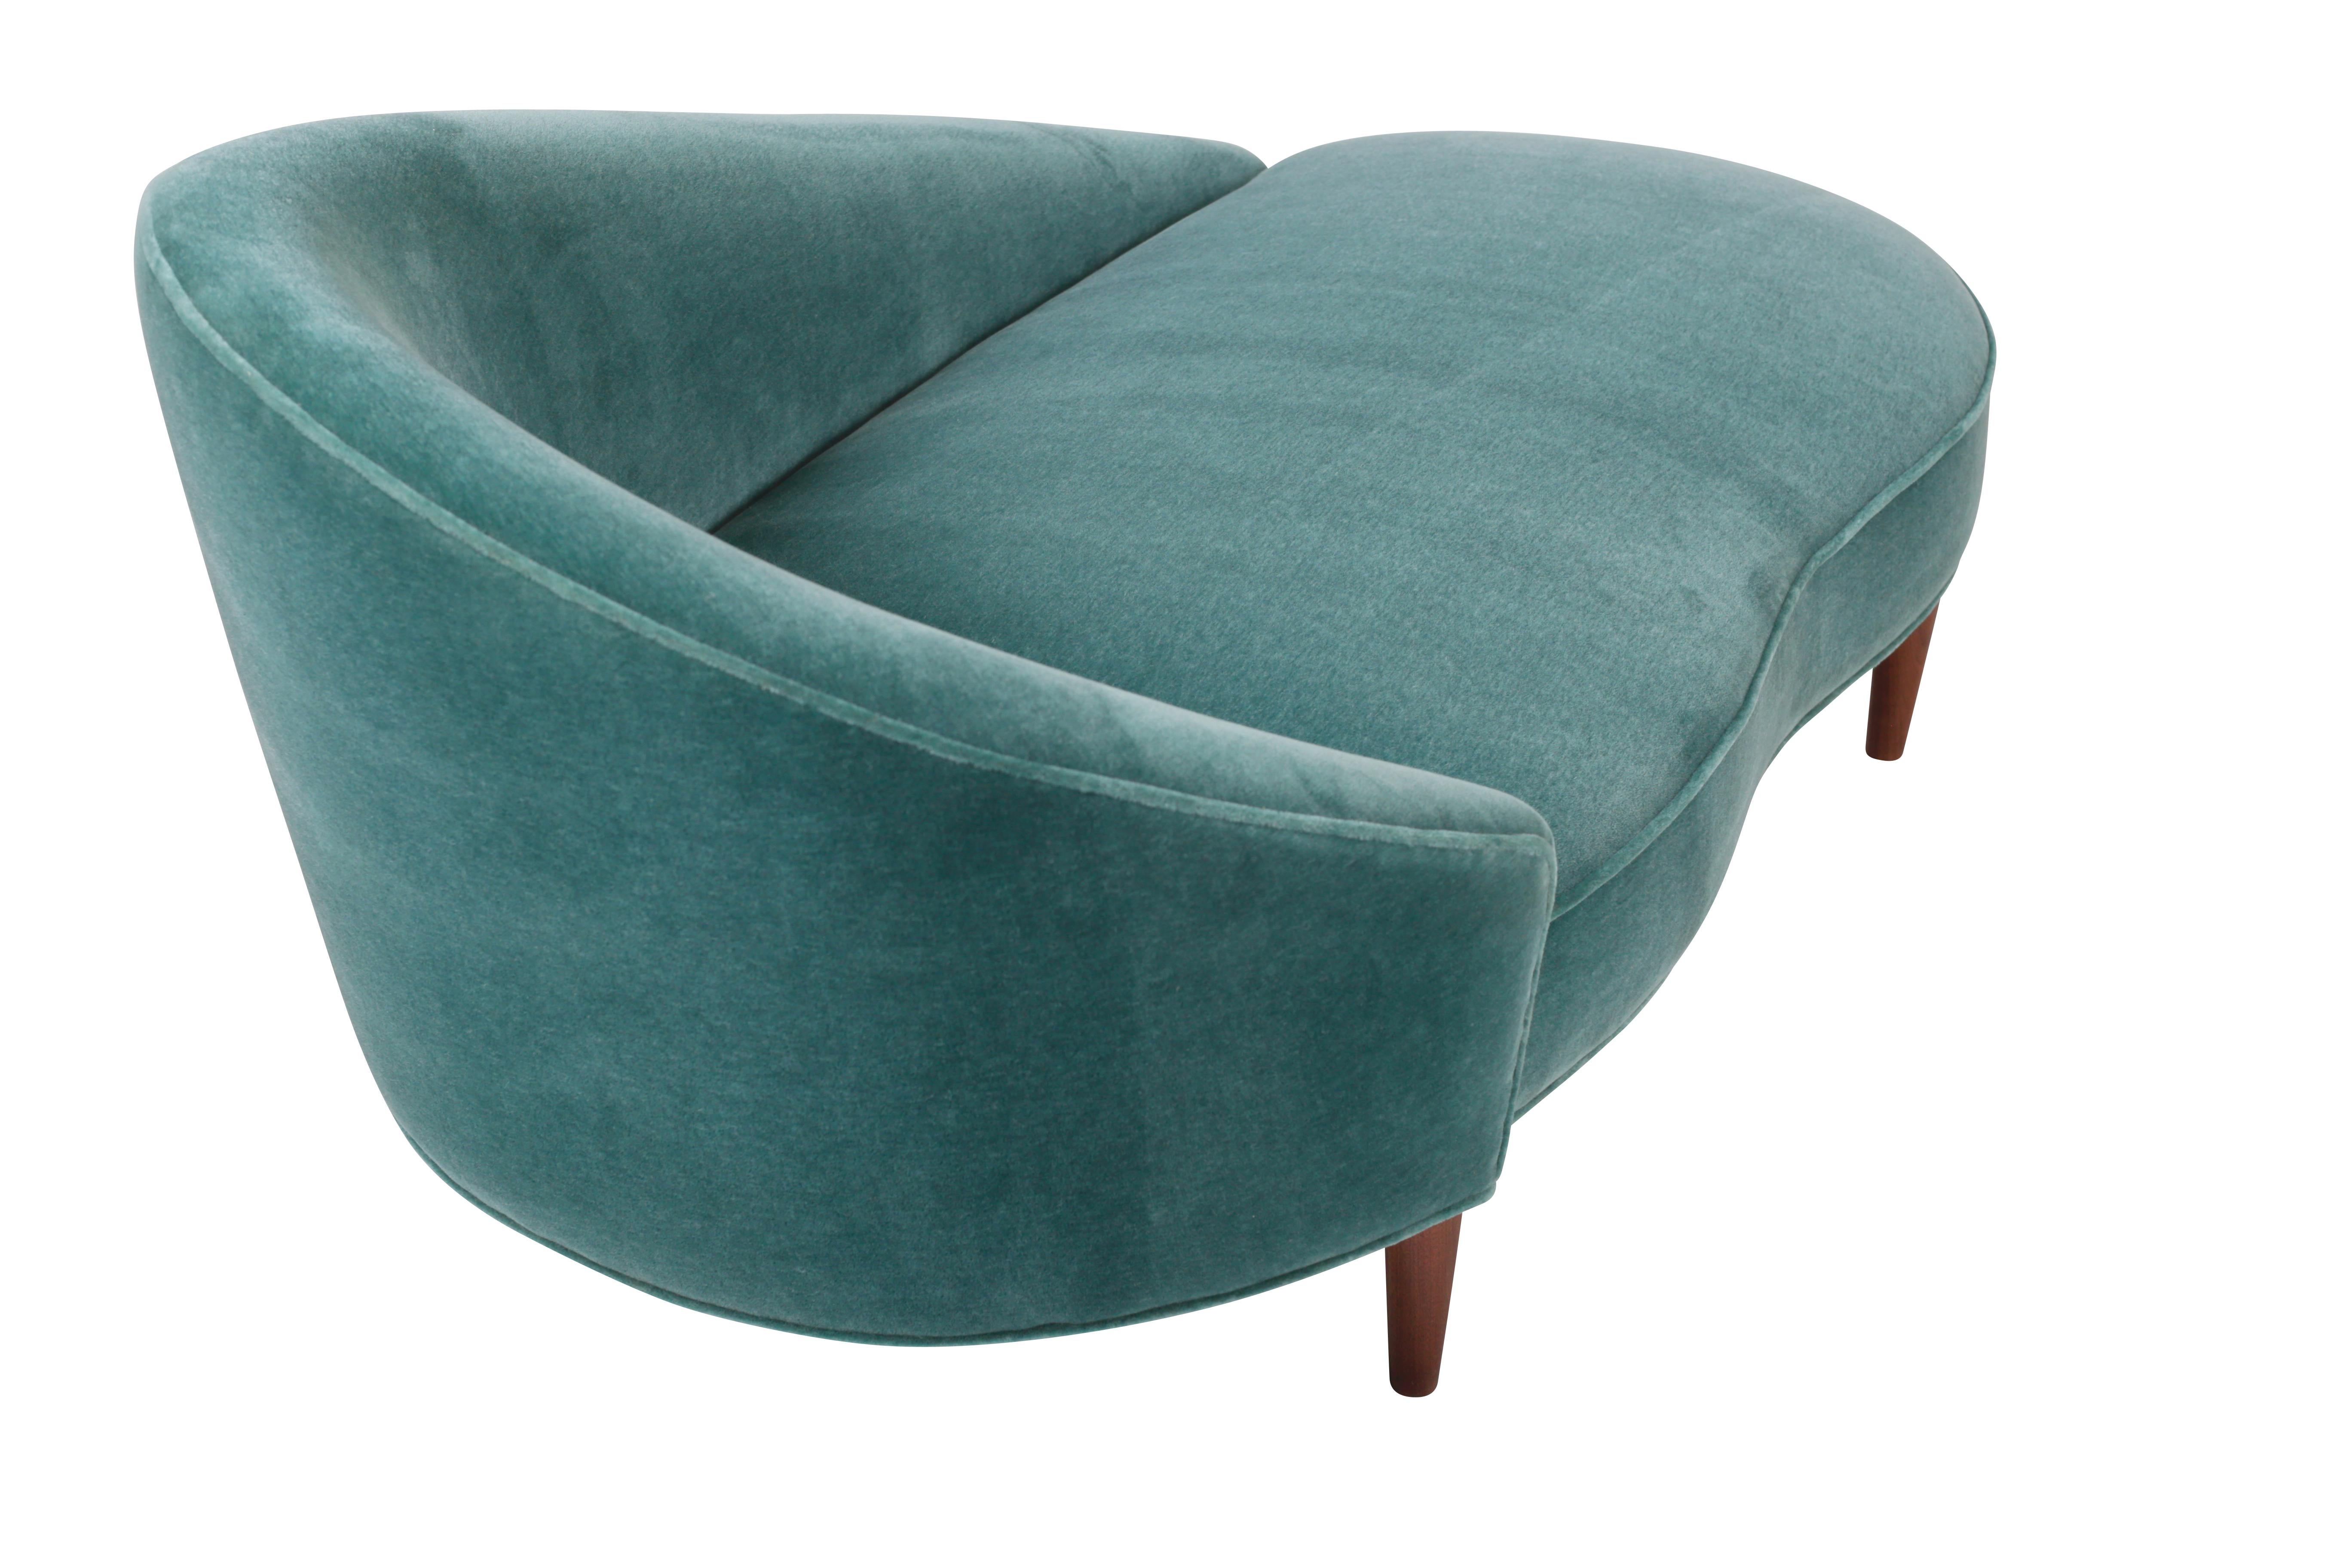 Adrian Pearsall oval chaise settee. Fully restored and reupholstered in mohair over refinished walnut legs.